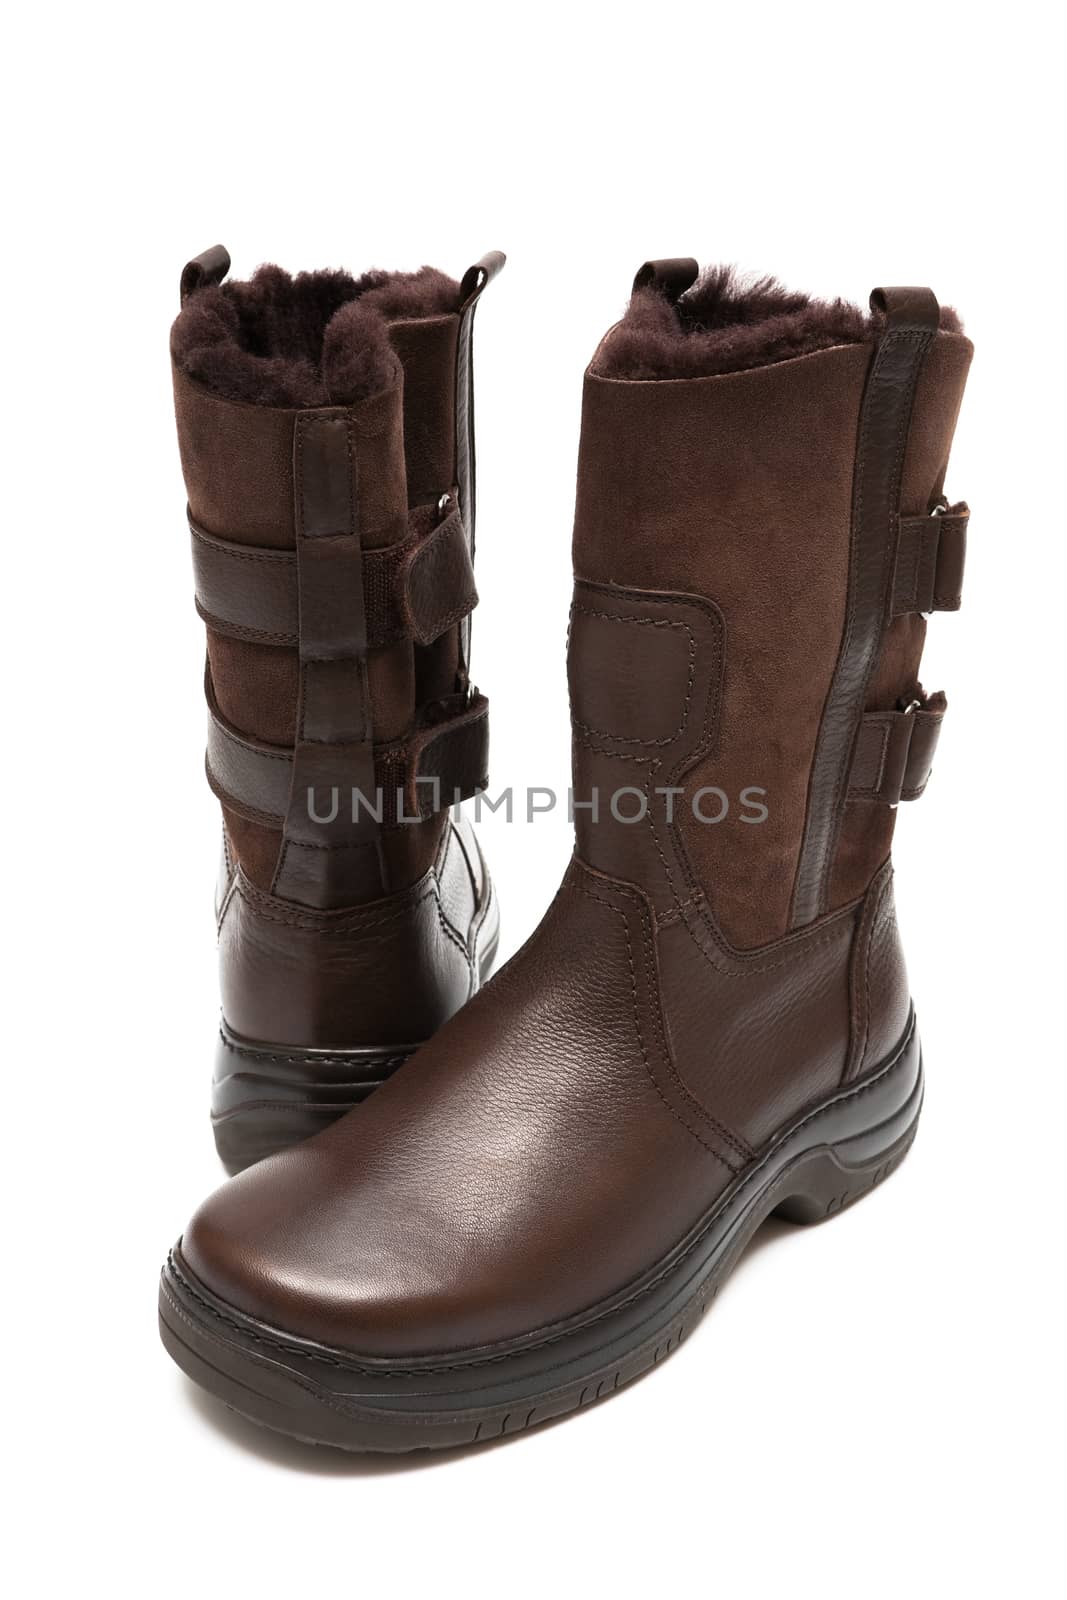 Man's boots for winter on a white background